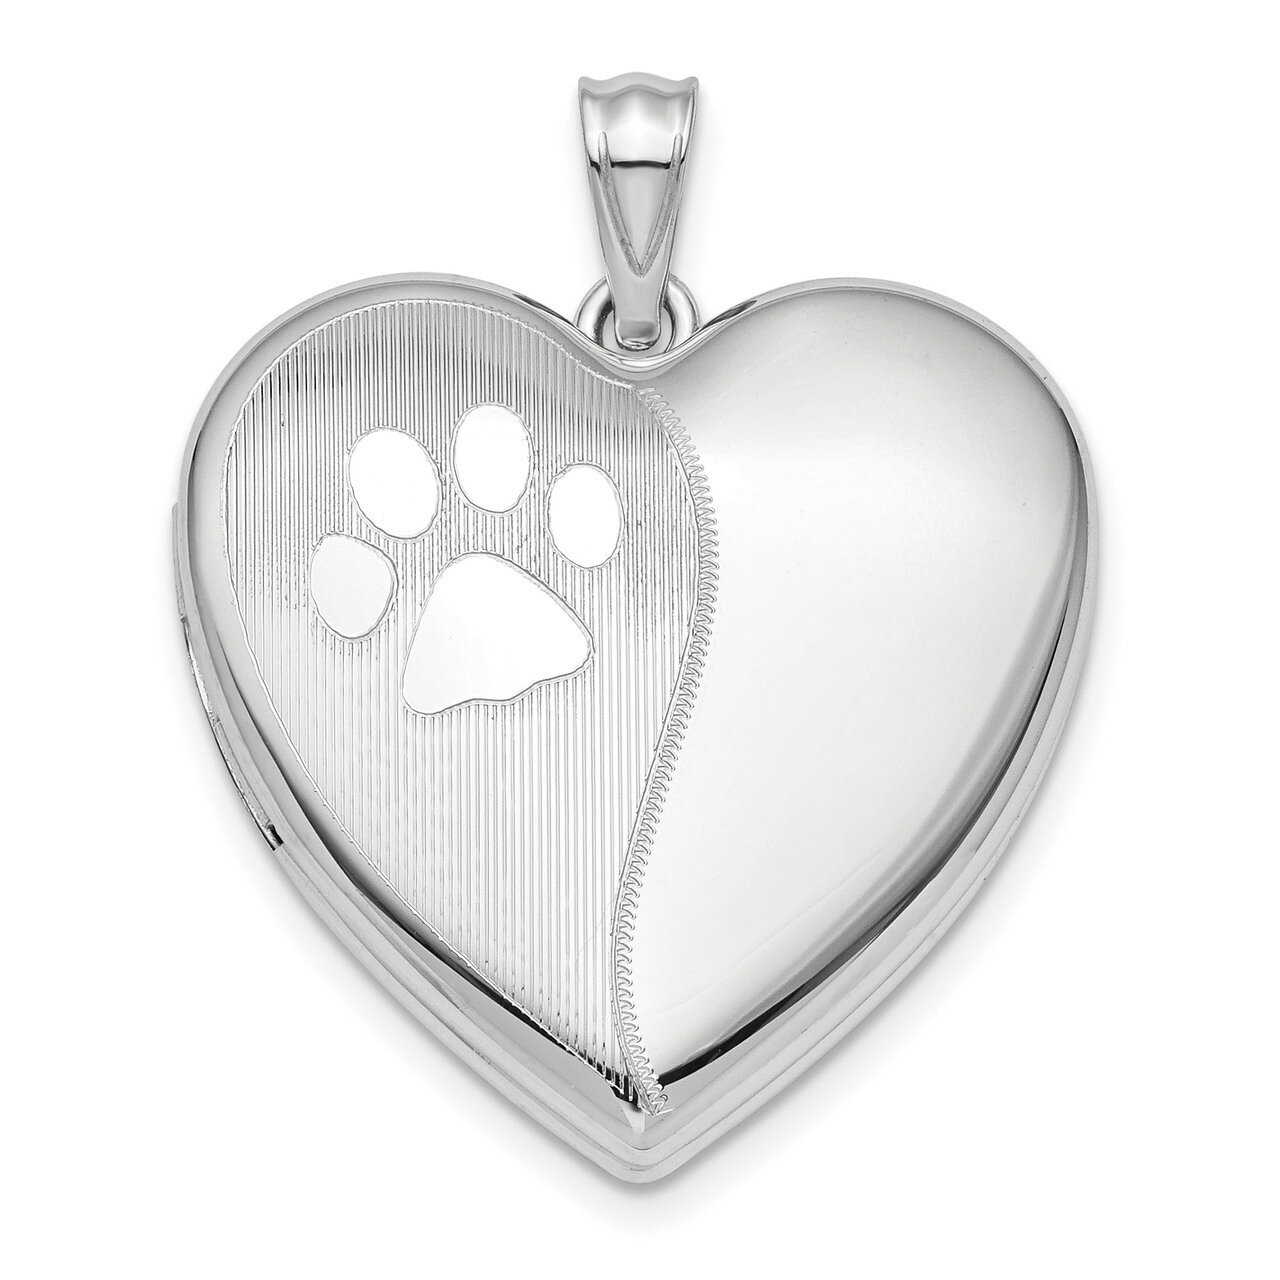 Satin & Polished Paw Prints Ash Holder Heart Sterling Silver Rhodium-plated QLS879